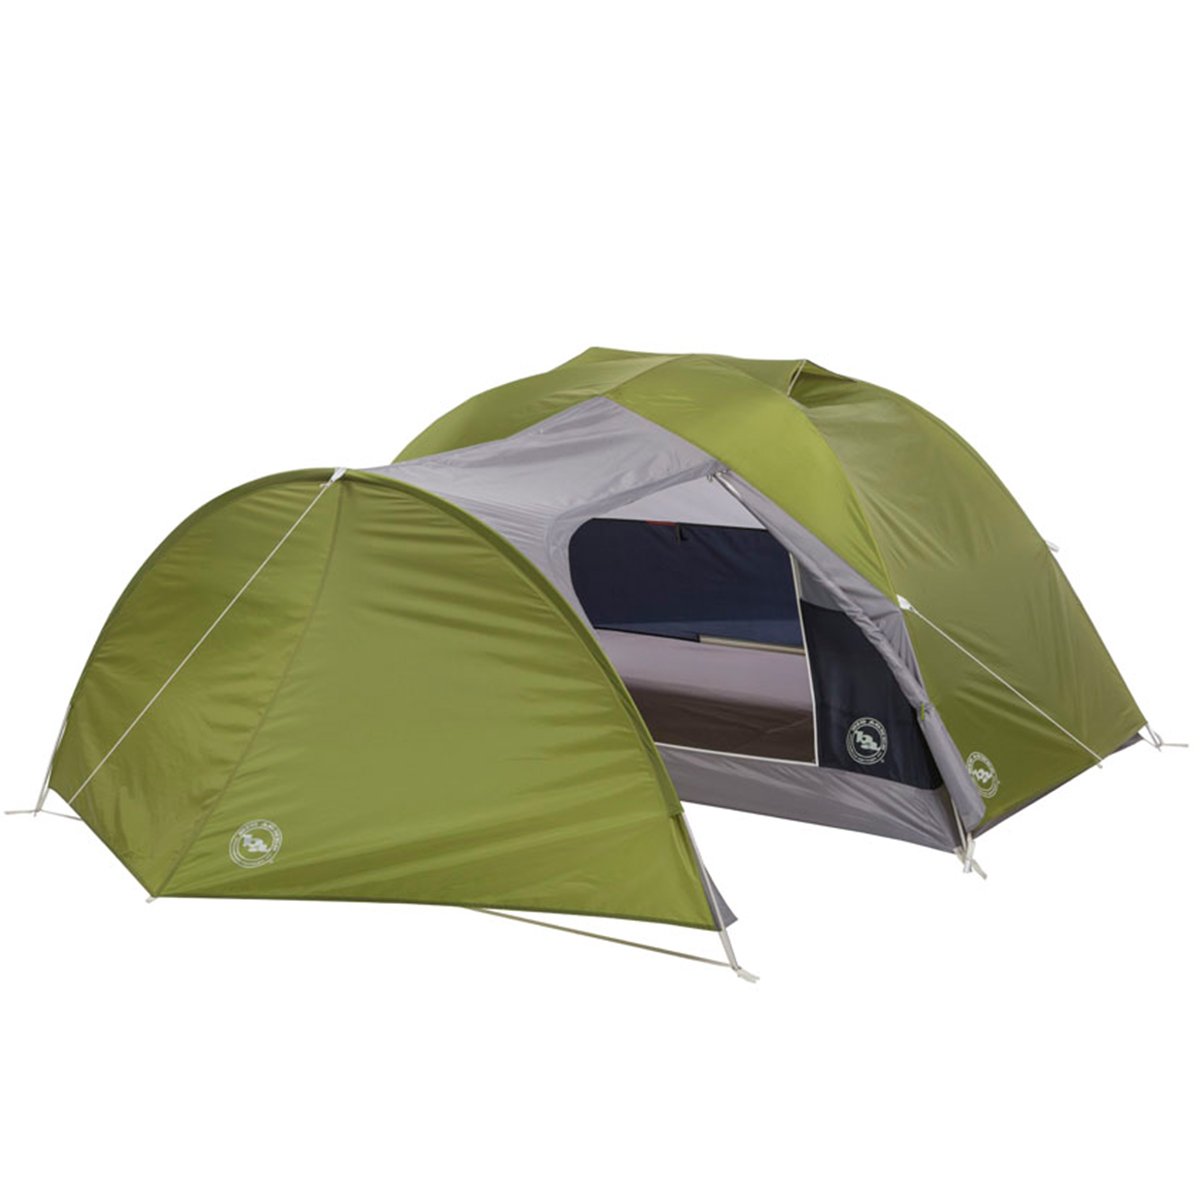 Big Agnes Blacktail 2 Person Hotel Tent in Big Agnes Blacktail 2 Hotel Tent by Big Agnes | Camping - goHUNT Shop by GOHUNT | Big Agnes - GOHUNT Shop